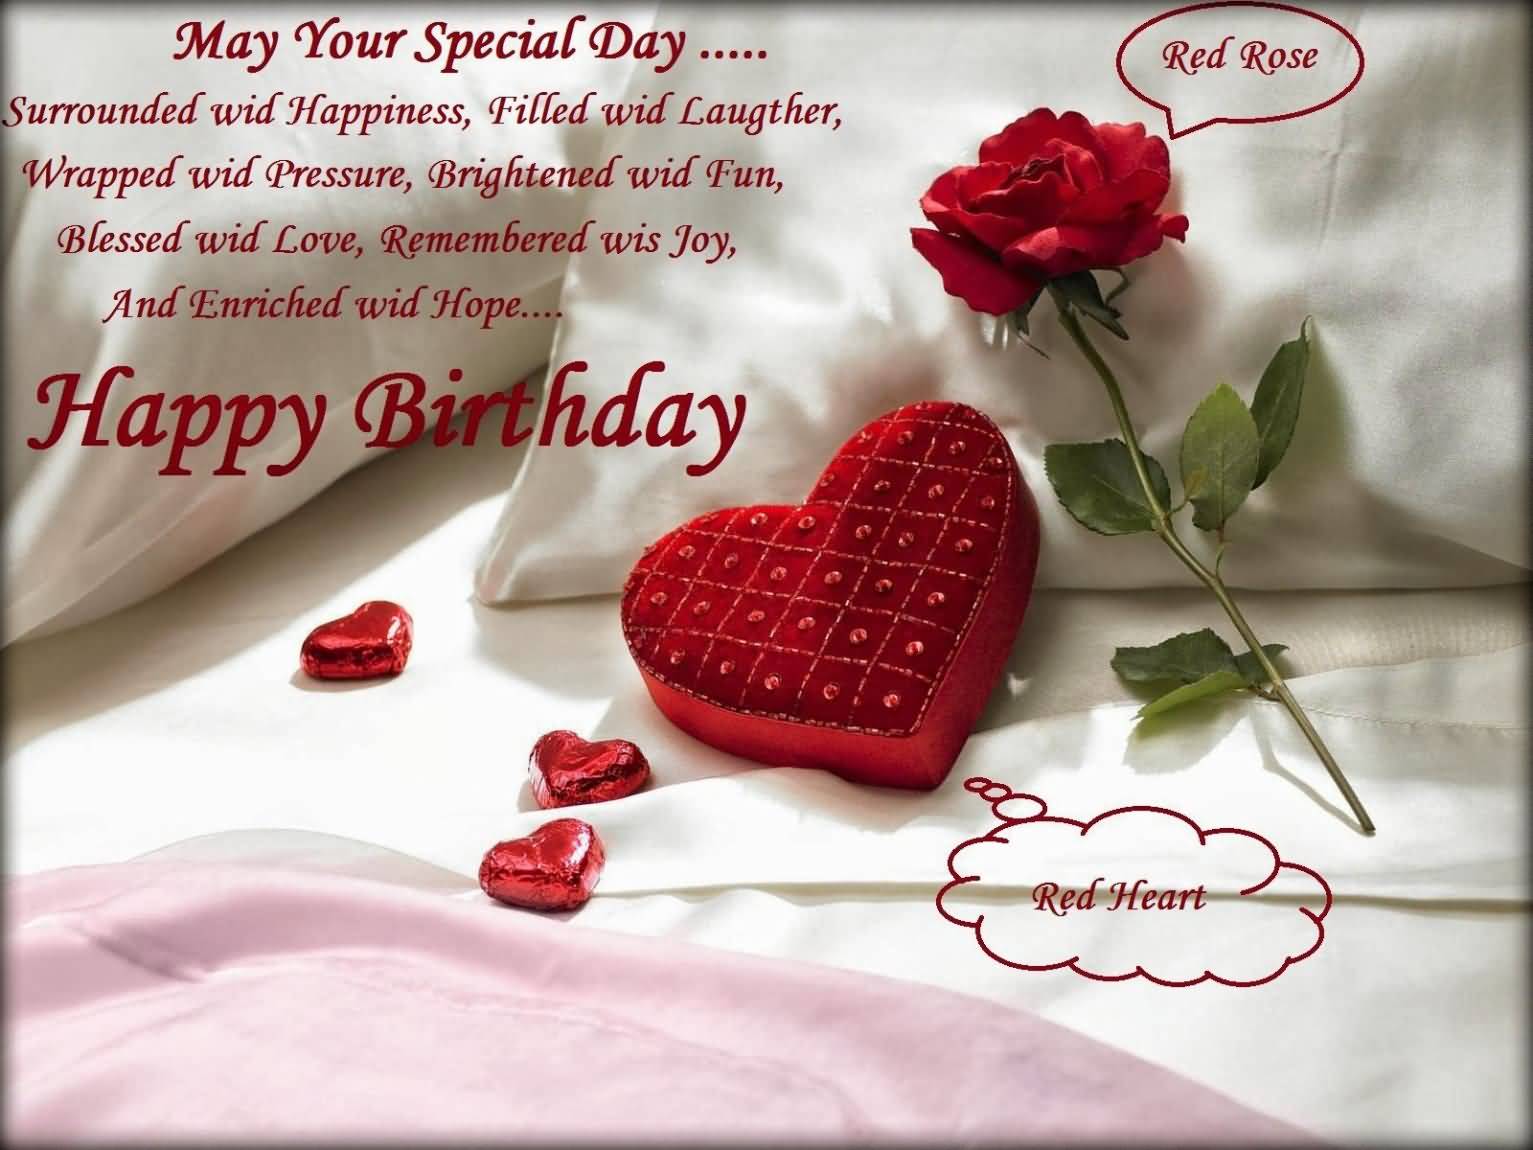 Happy Birthday Wishes For Husband Images Free Download May Your Special Day...